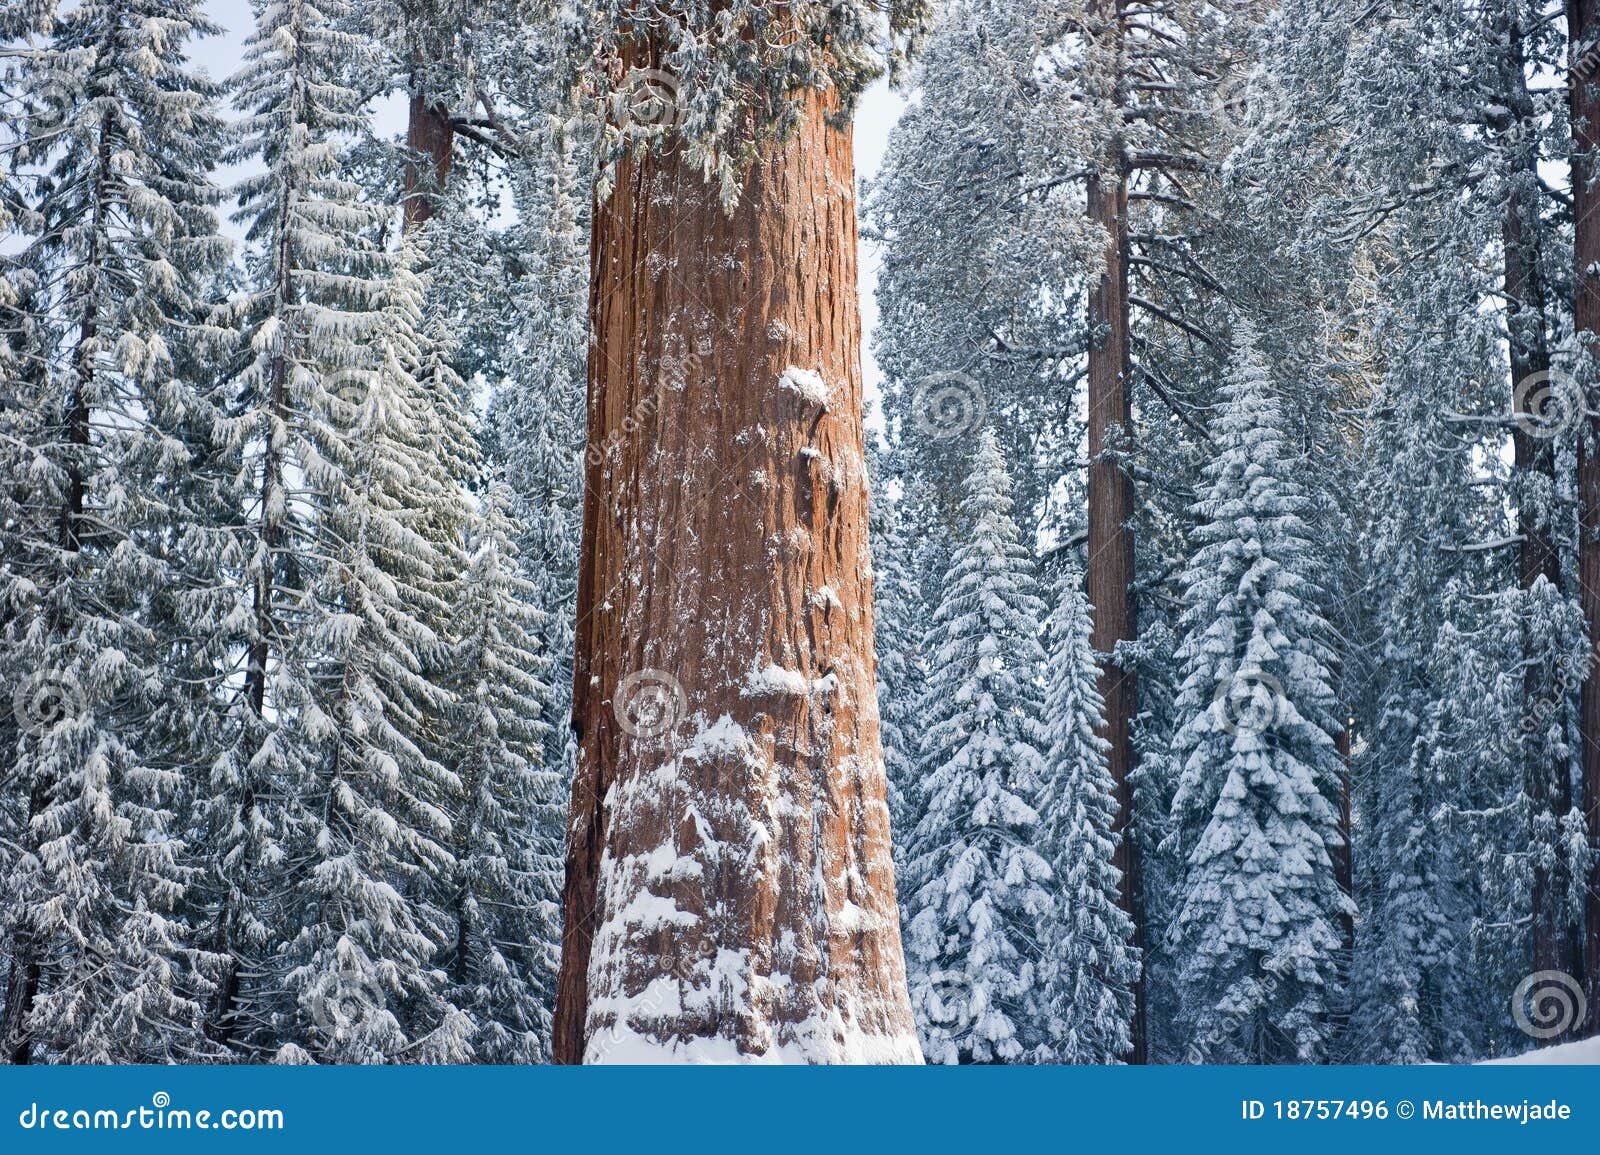 the giant sequoia tree covered in snow